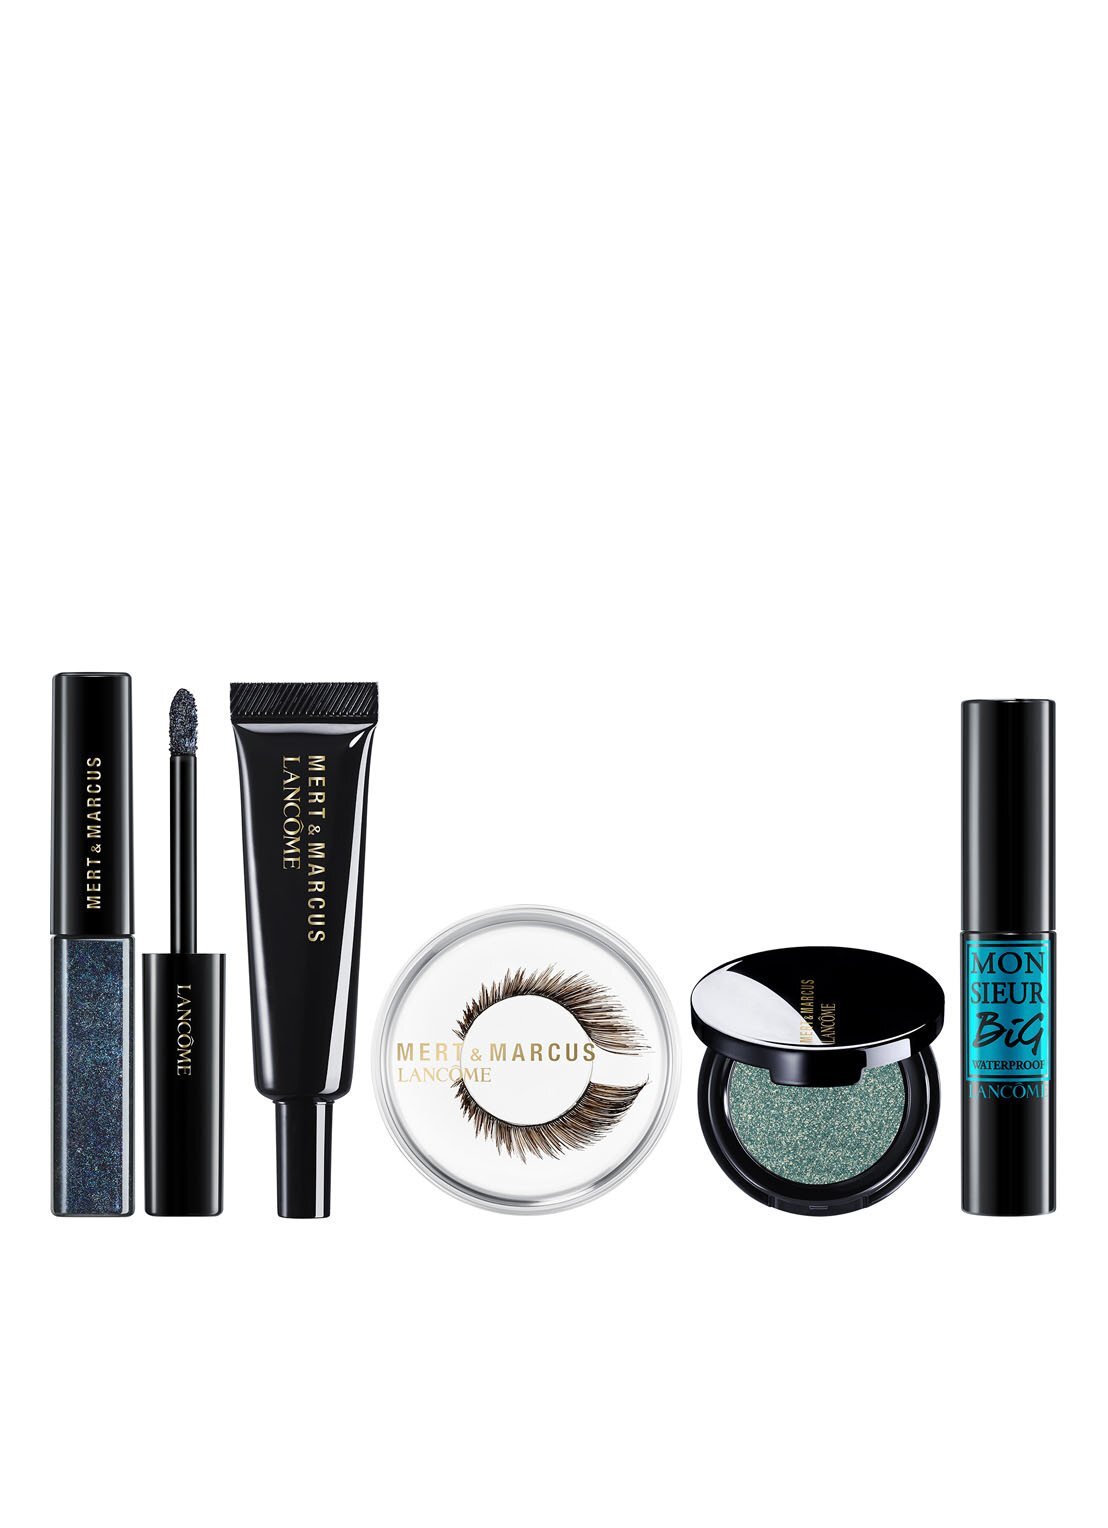 Lancôme Mert & Marcus Eyes Cold as Ice Kit Blue - Limited Edition make-up set